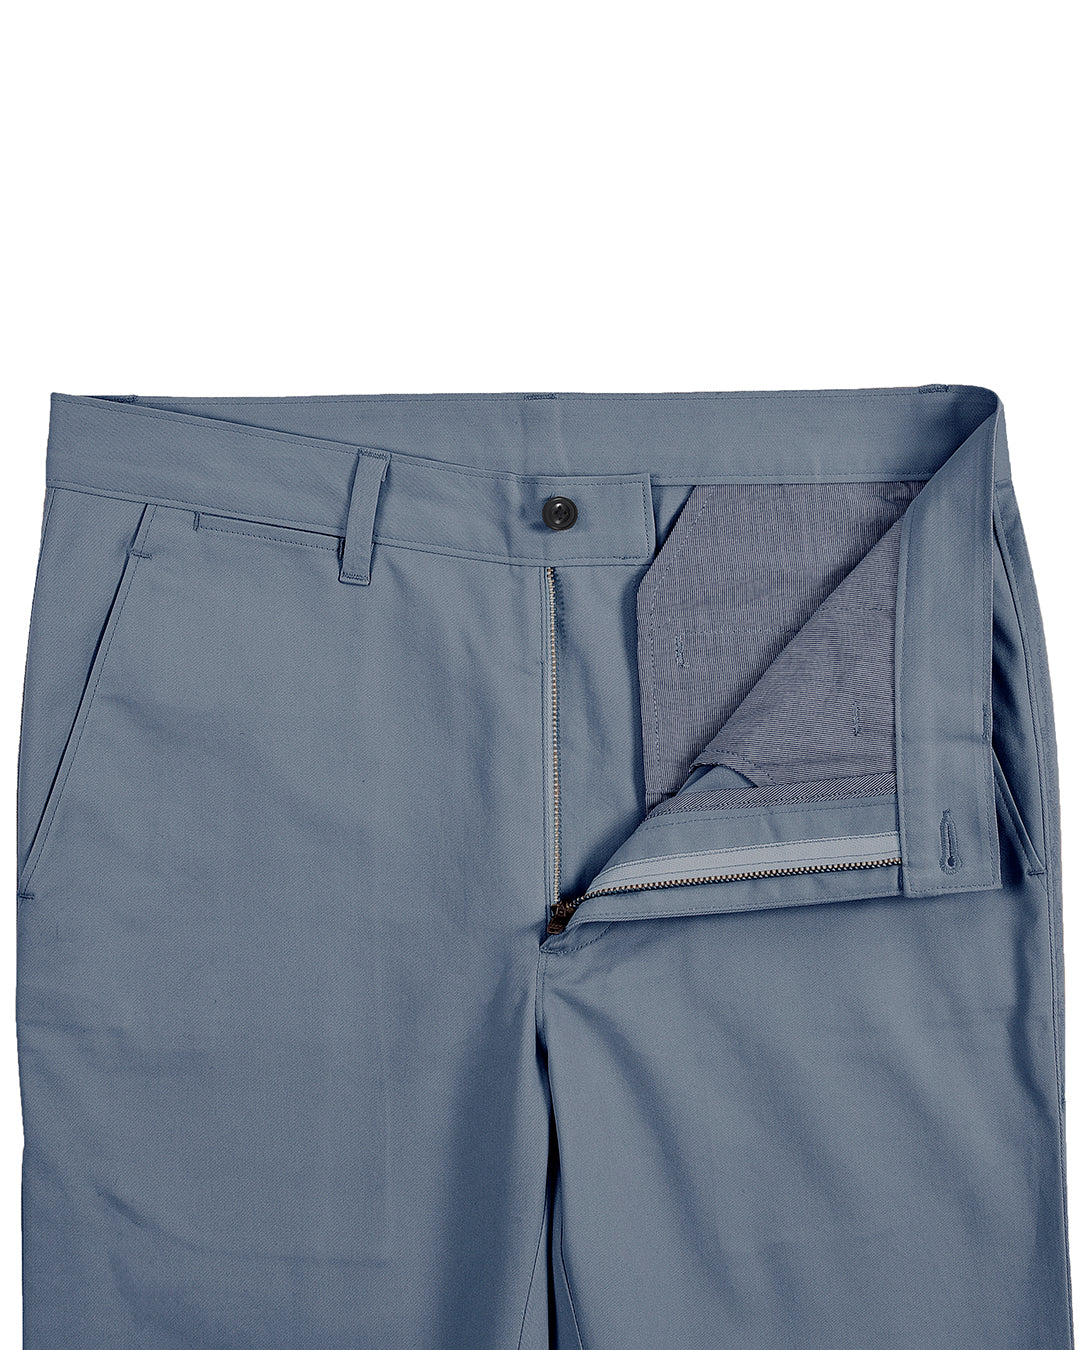 Front open view of custom Genoa Chino pants for men by Luxire in blueish grey